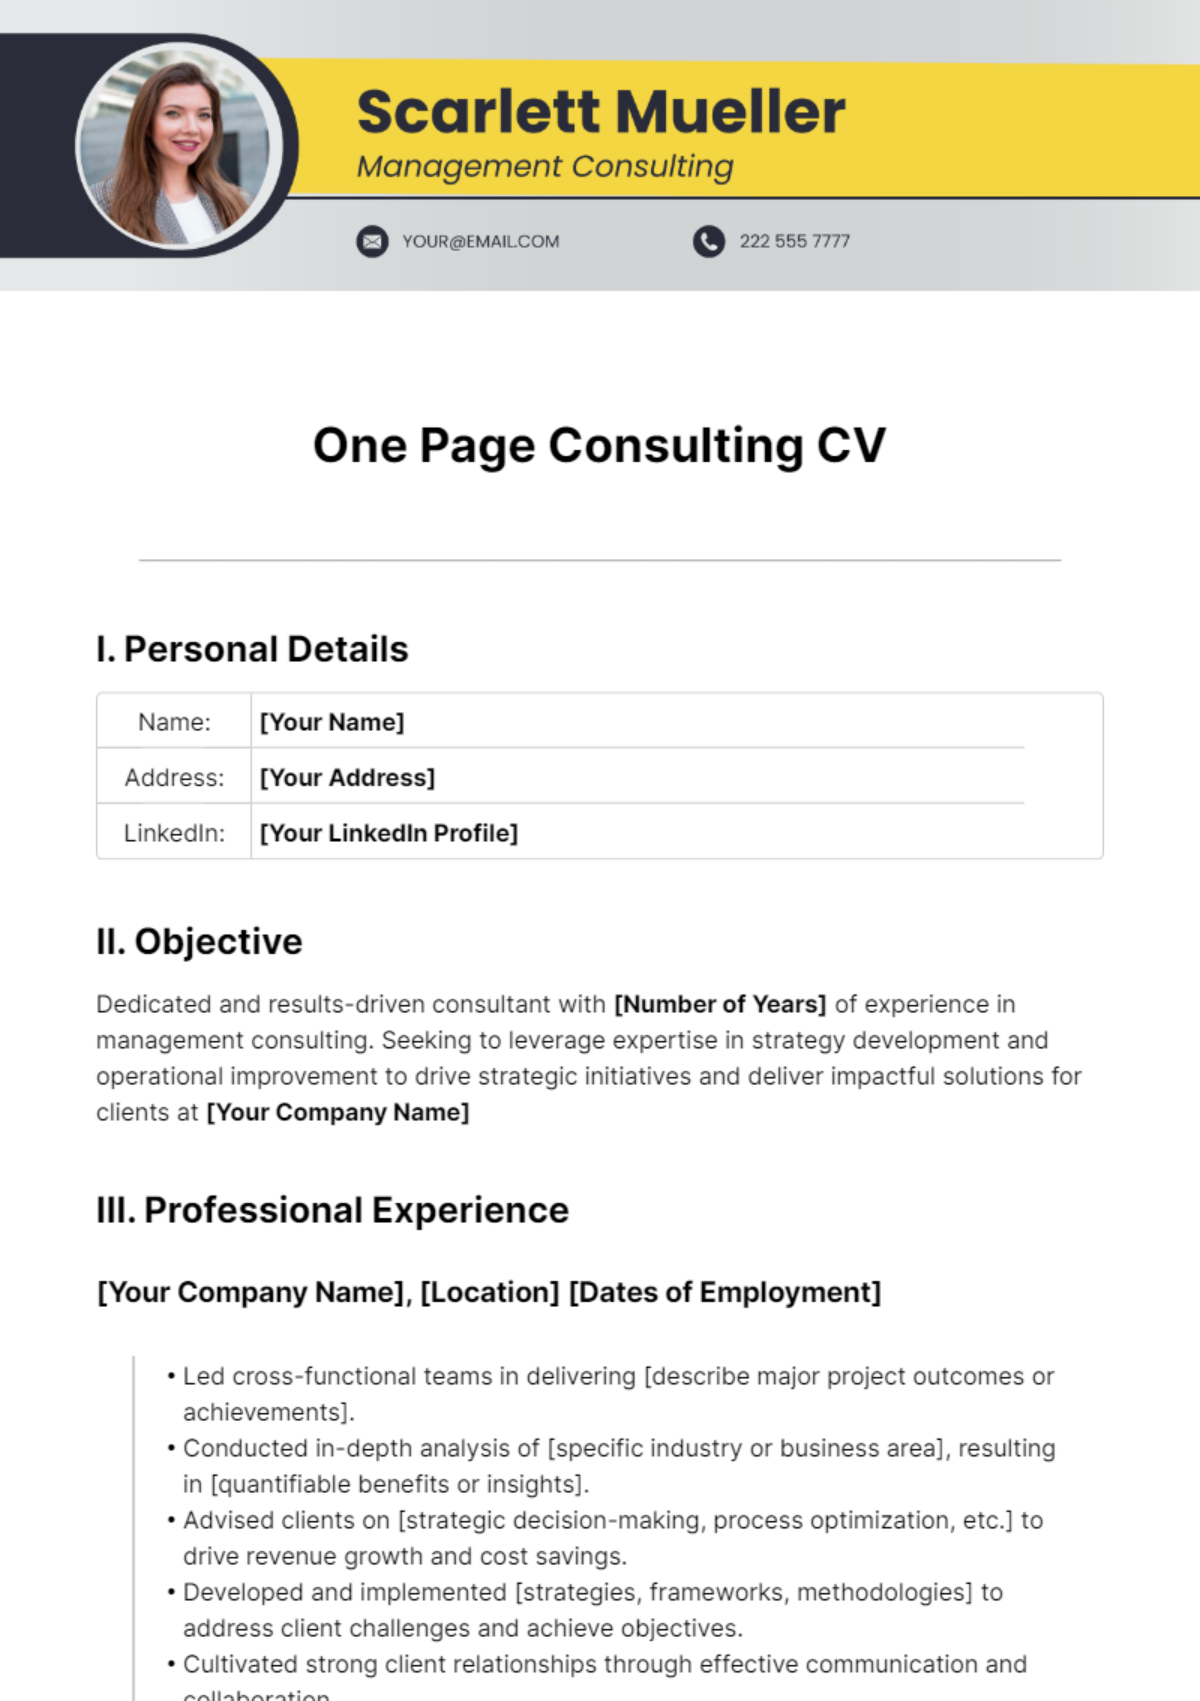 One Page Consulting CV Template